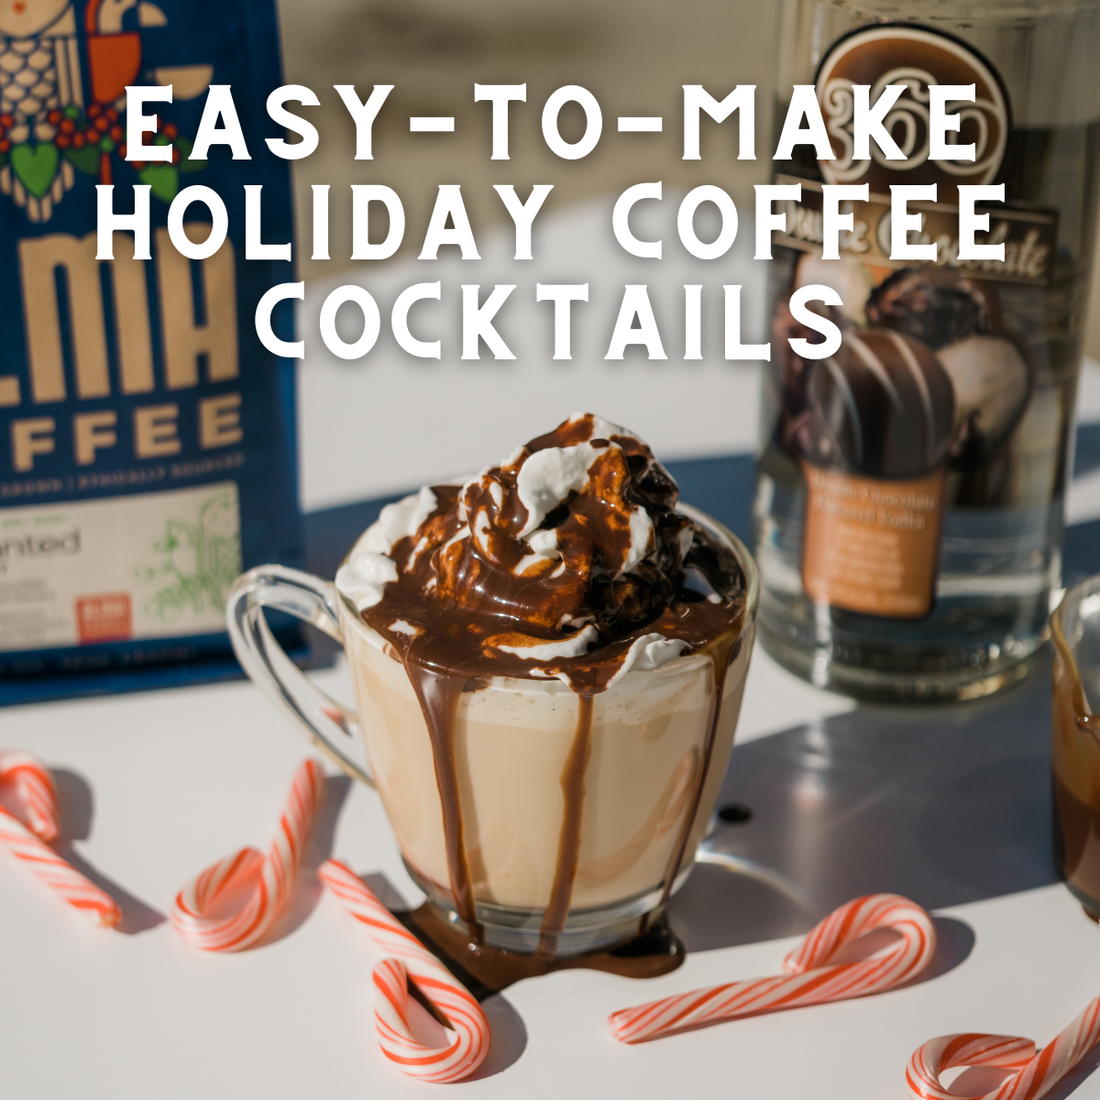 Easy-to-Make Holiday Coffee Cocktails